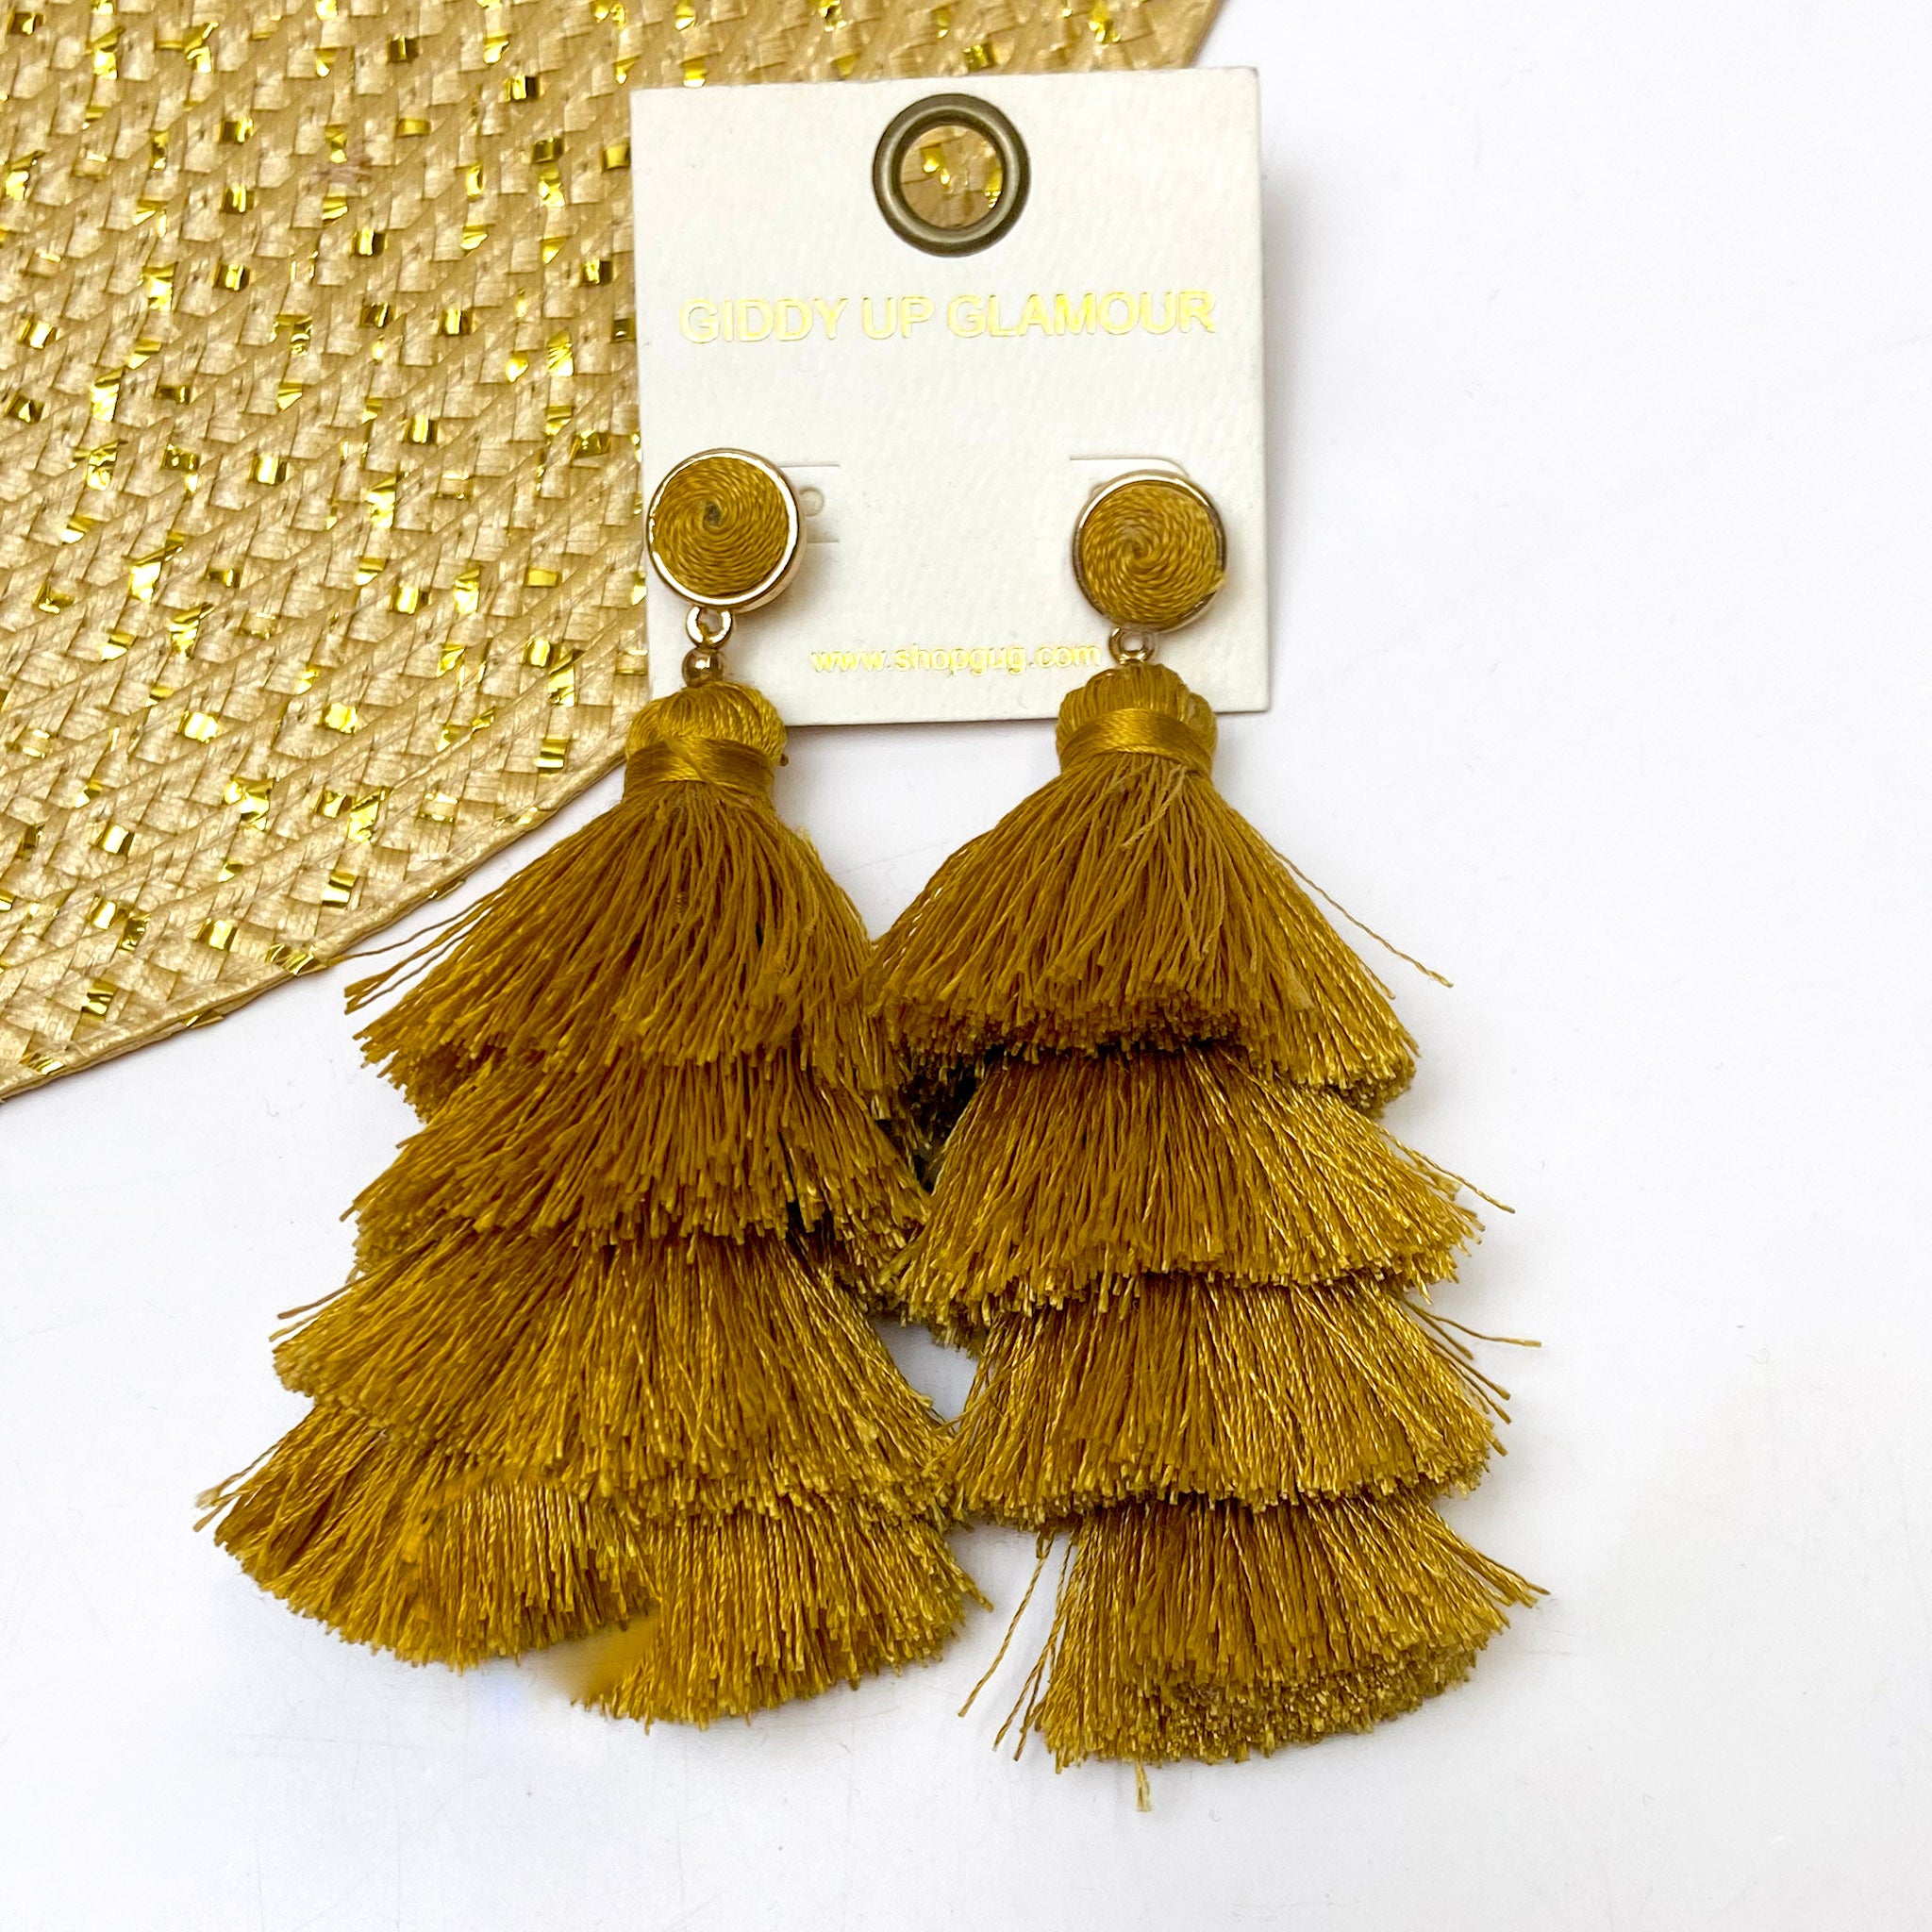 Four Tiered Tassel Earrings with Threaded Stud in Gold